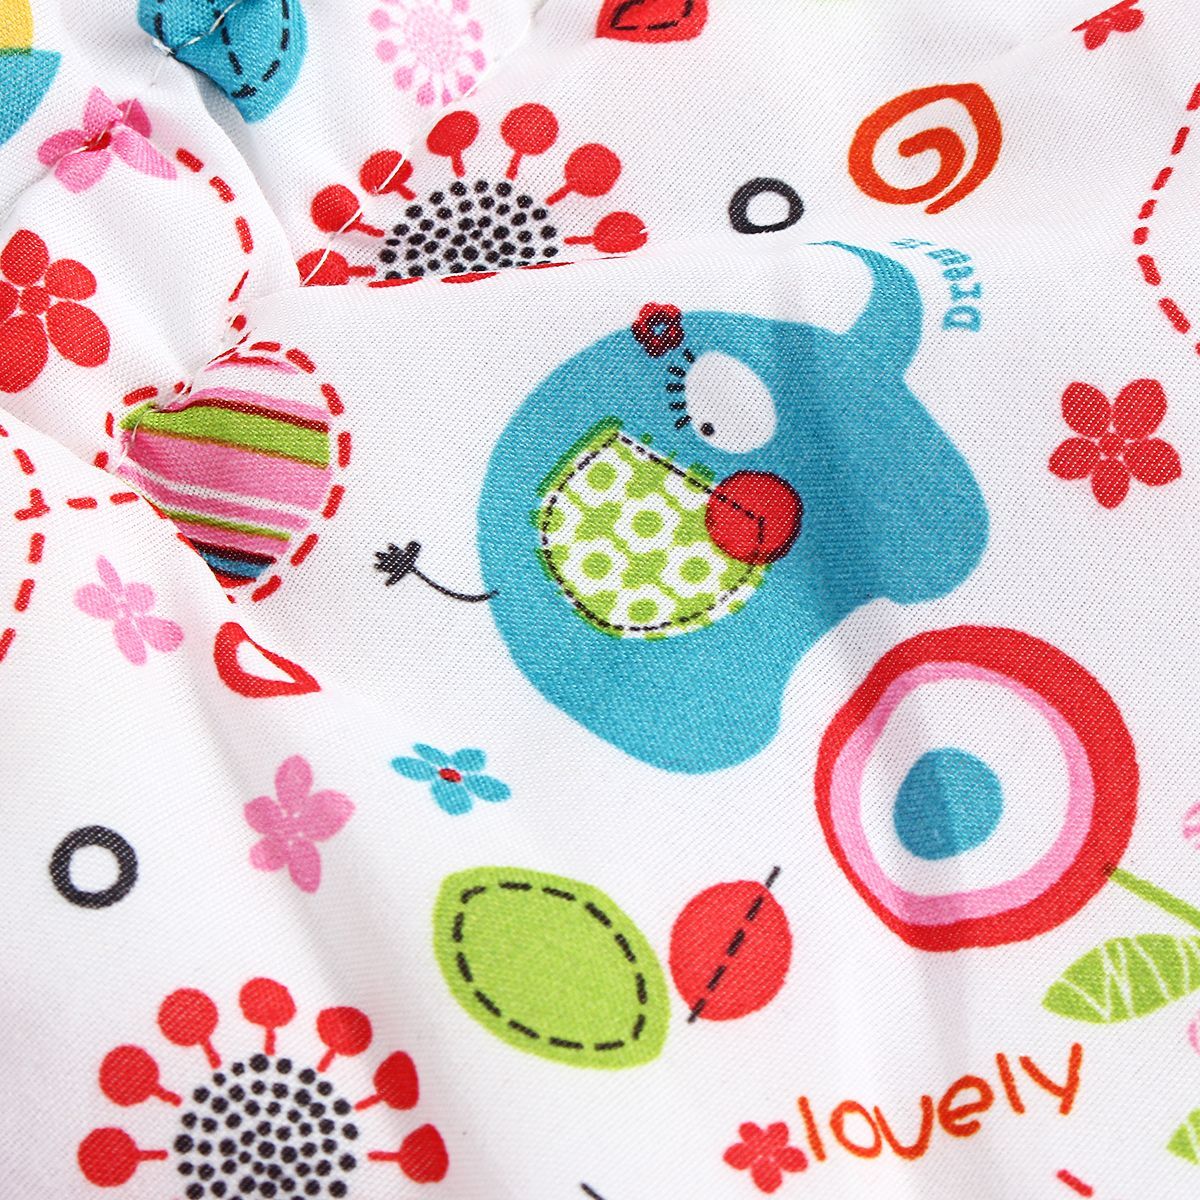 Baby-Shopping-Cart-Seat-Mat-Supermarket-Trolley-Kids-Protector-Cover-Mat-Cushion-1557105